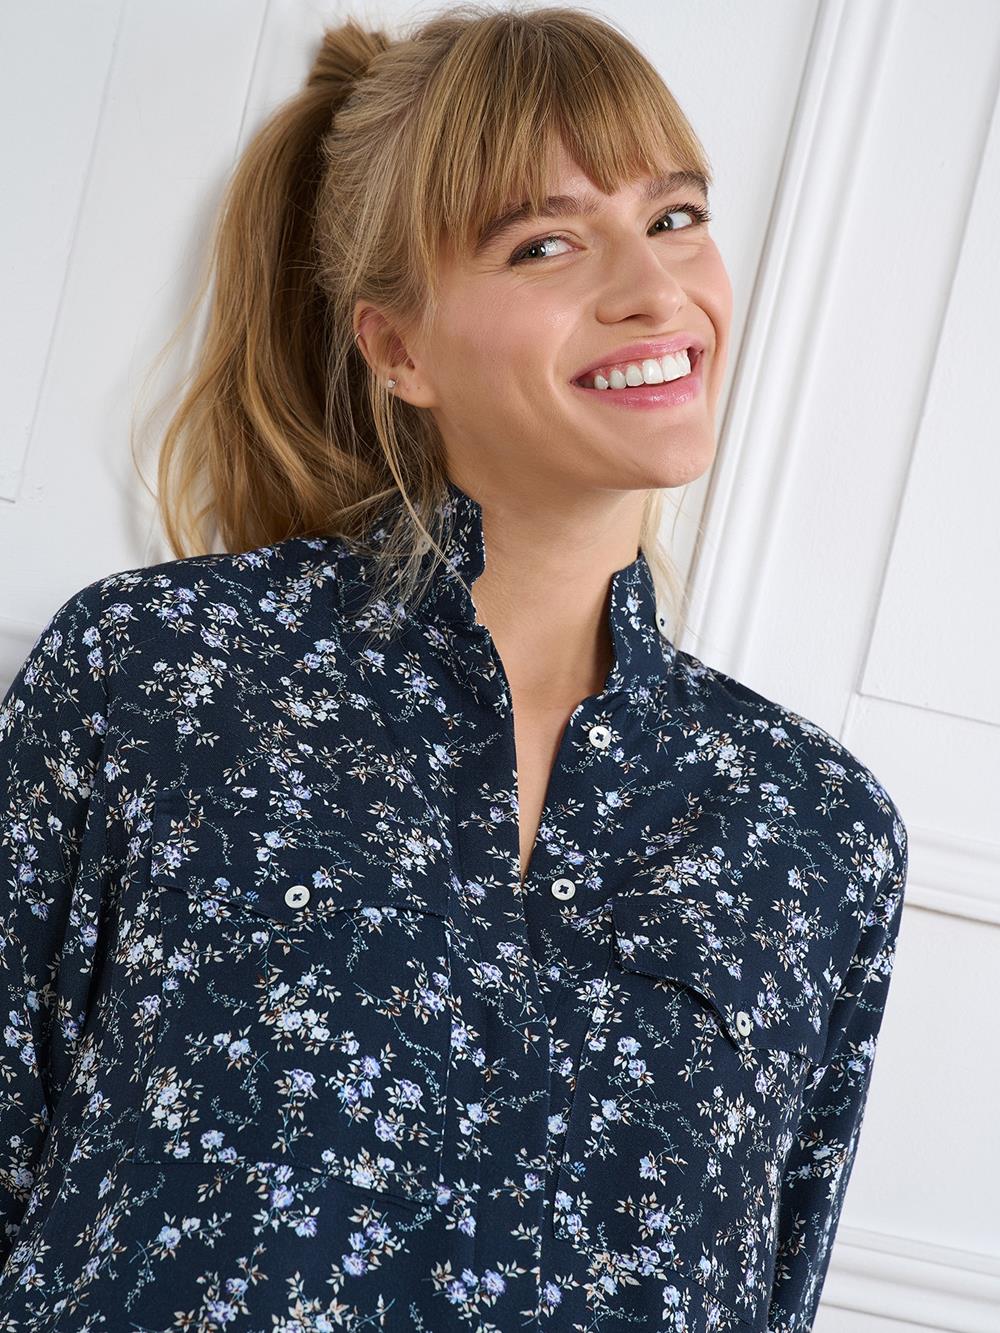 Alice navy blue shirt with floral print